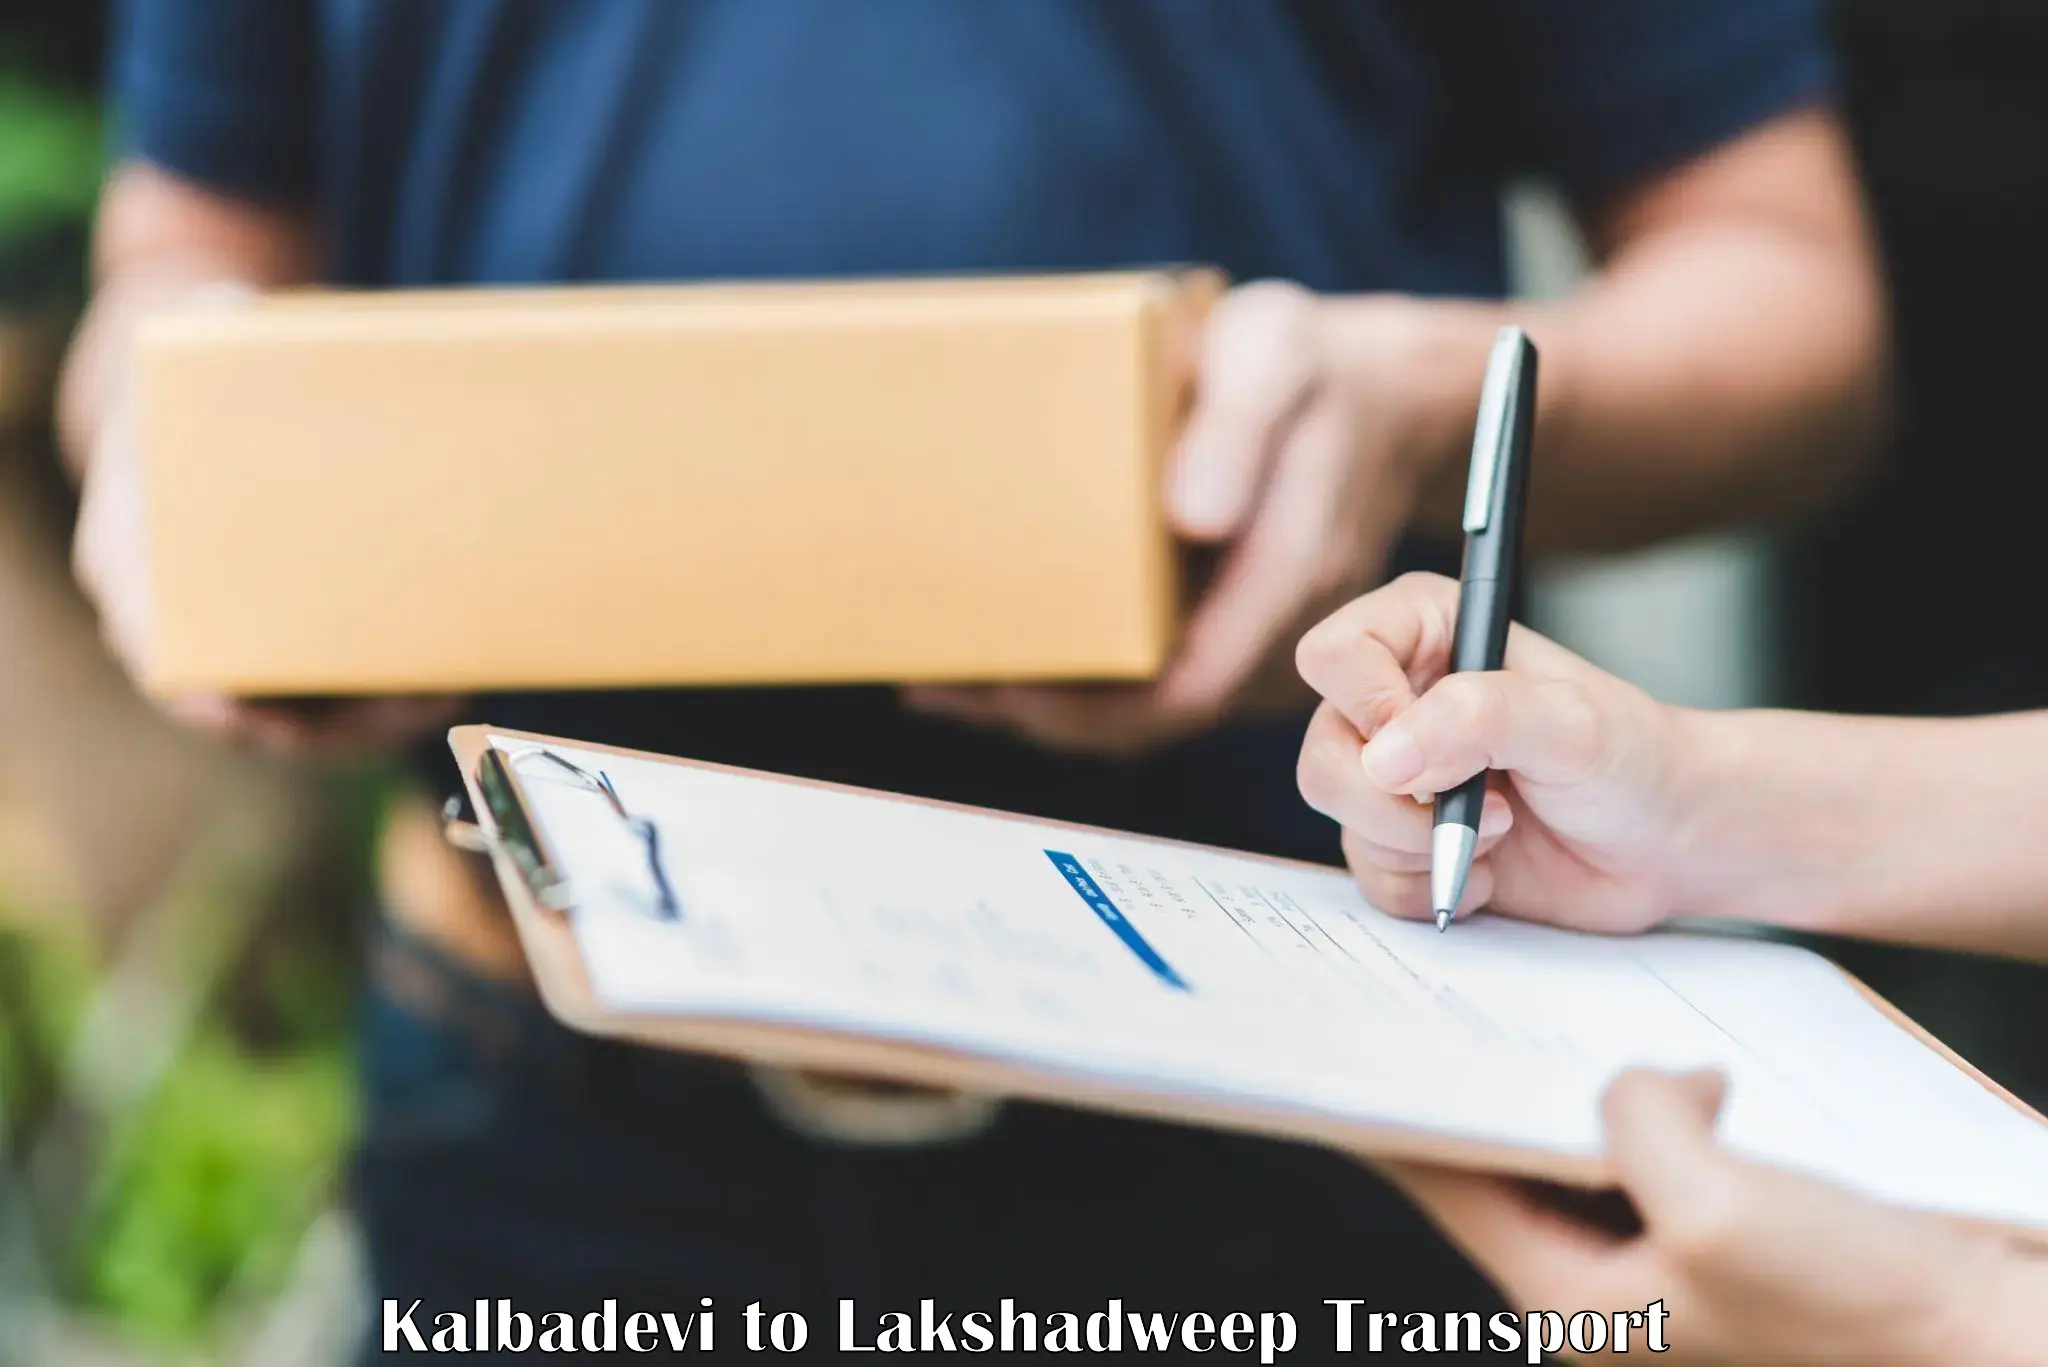 Daily parcel service transport Kalbadevi to Lakshadweep